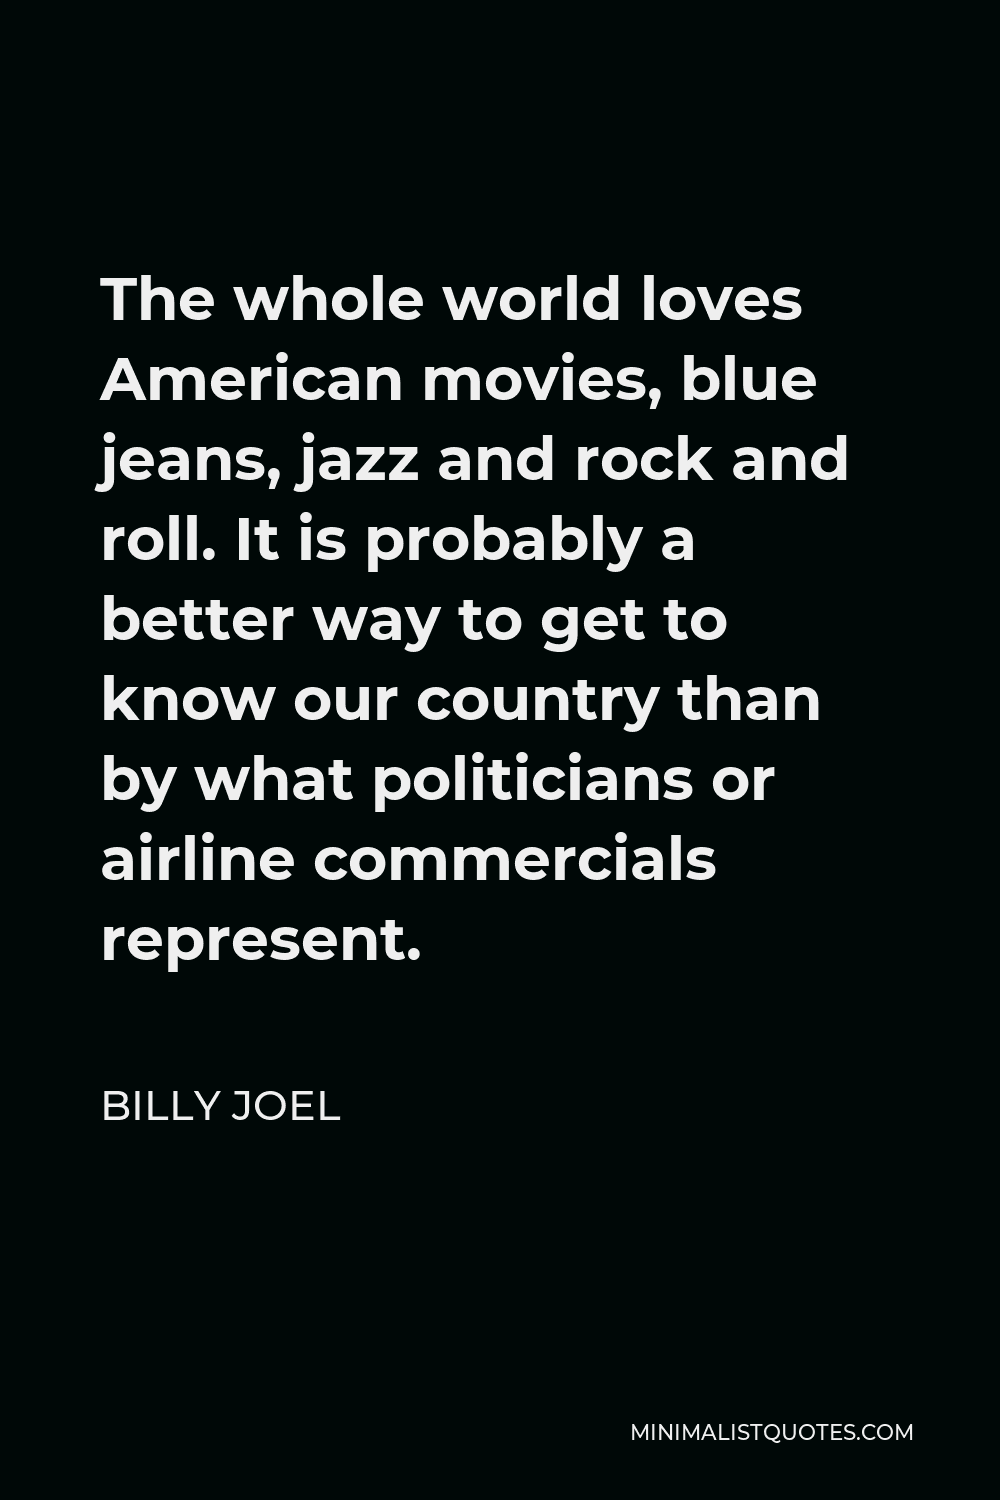 Billy Joel Quote - The whole world loves American movies, blue jeans, jazz and rock and roll. It is probably a better way to get to know our country than by what politicians or airline commercials represent.